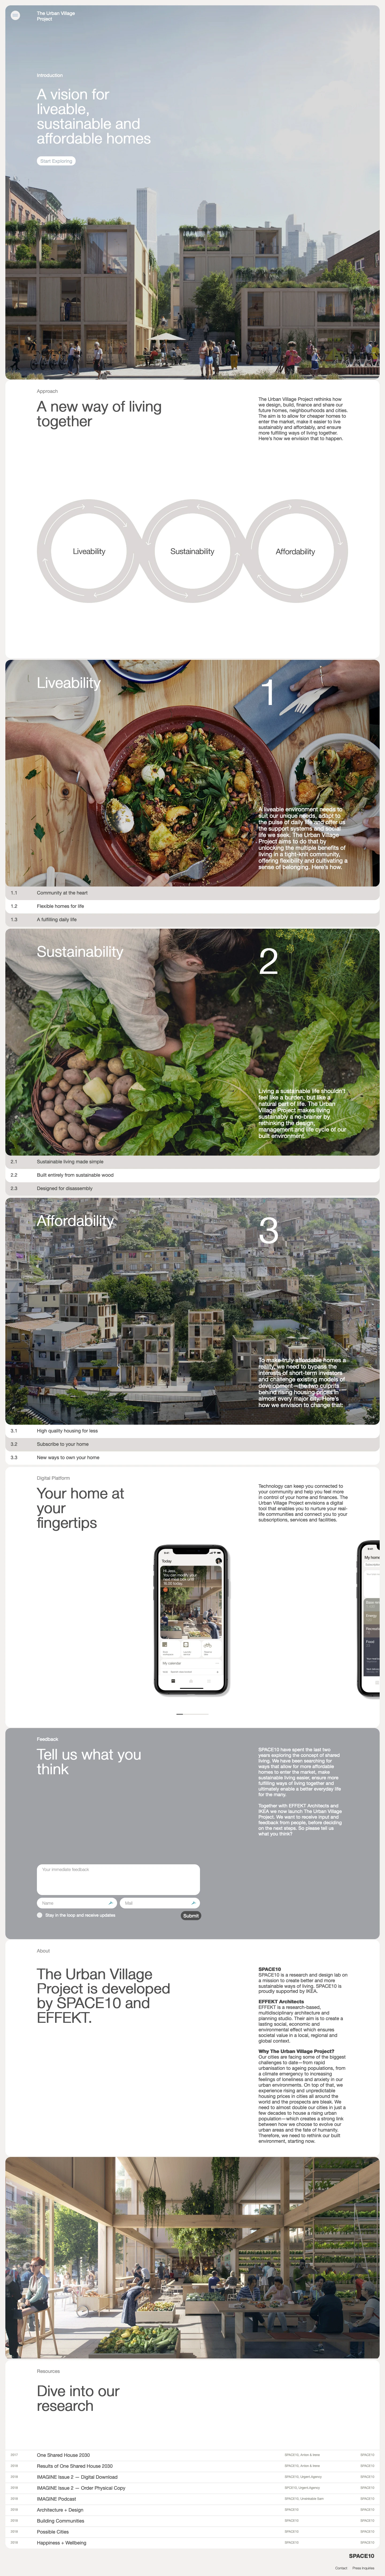 The Urban Village Project Landing Page Example: The Urban Village Project rethinks how we design, build, finance and share our future homes, neighbourhoods and cities. The aim is to allow for cheaper homes to enter the market, make it easier to live sustainably and affordably, and ensure more fulfilling ways of living together. 